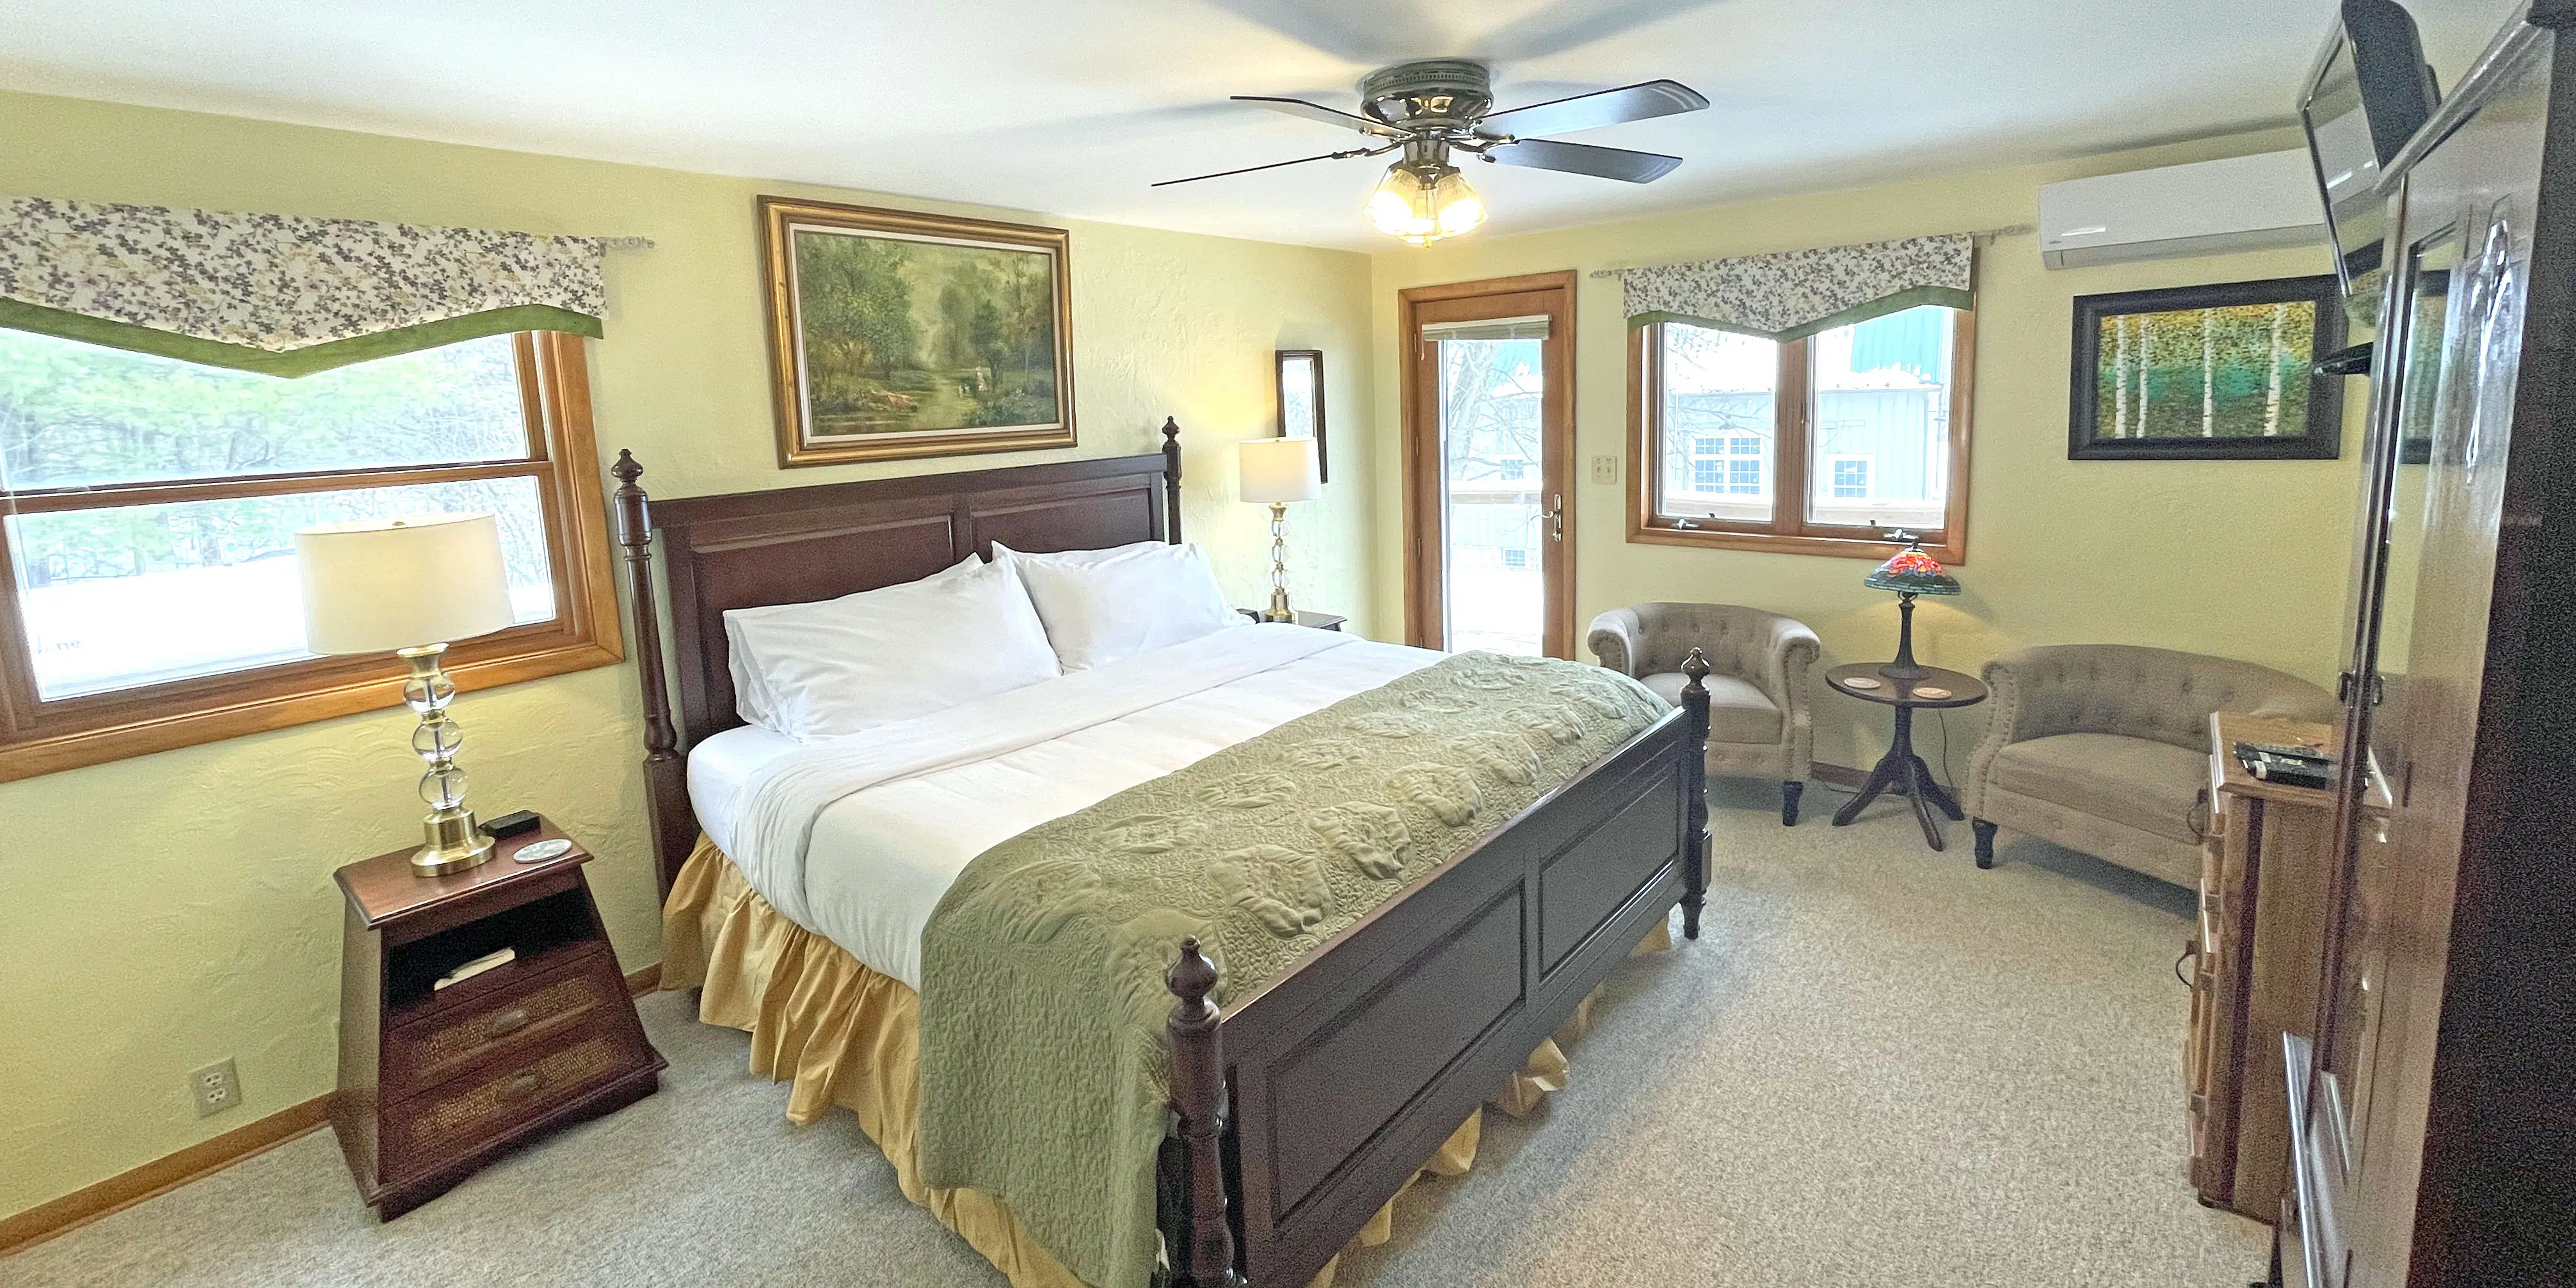 view from door with large bed, chairs, wardrobe. Yellow walls and meadow accents